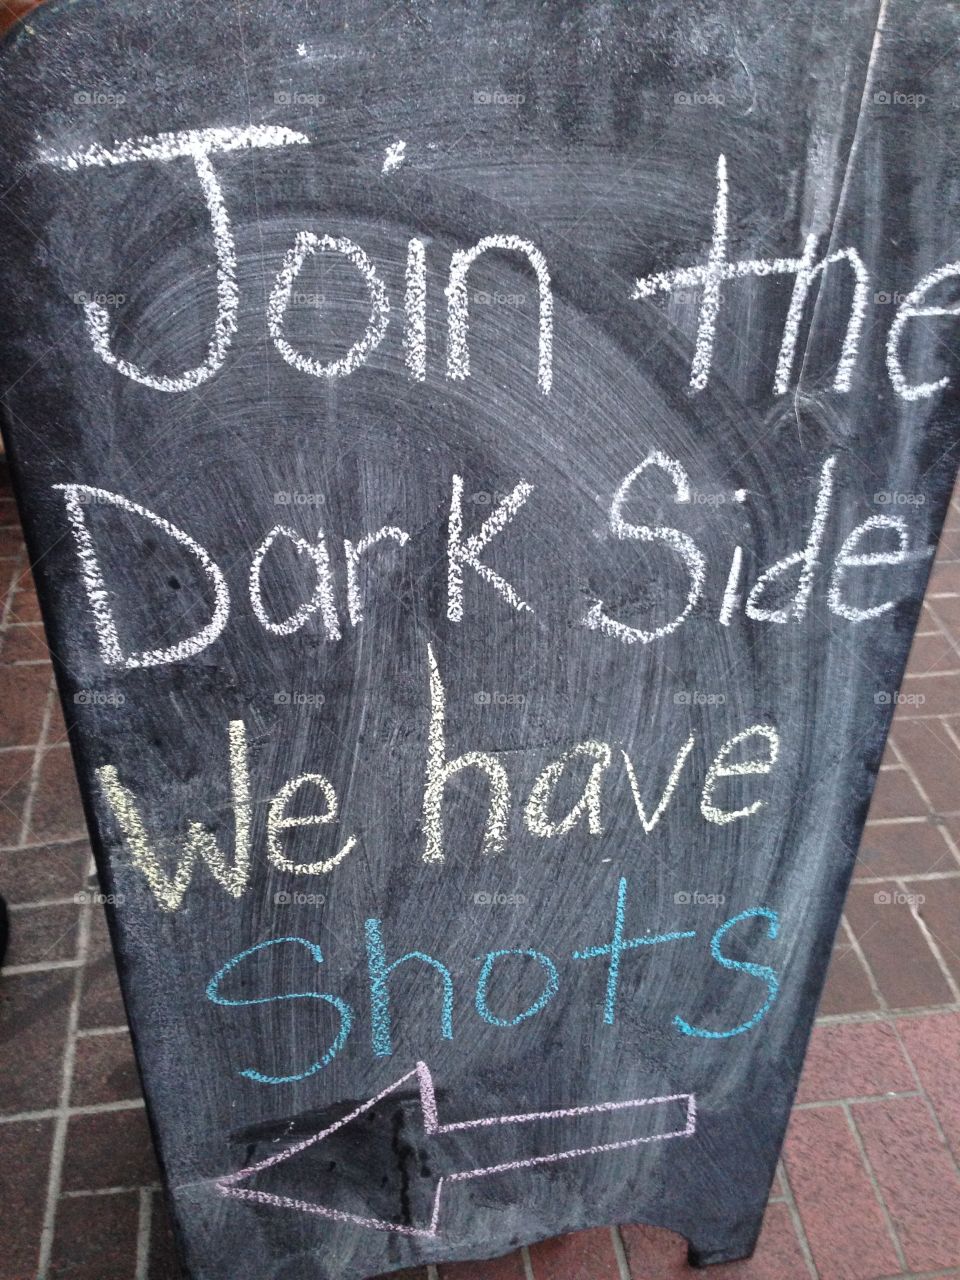 A San Francisco bar joining in on the Comicon fun